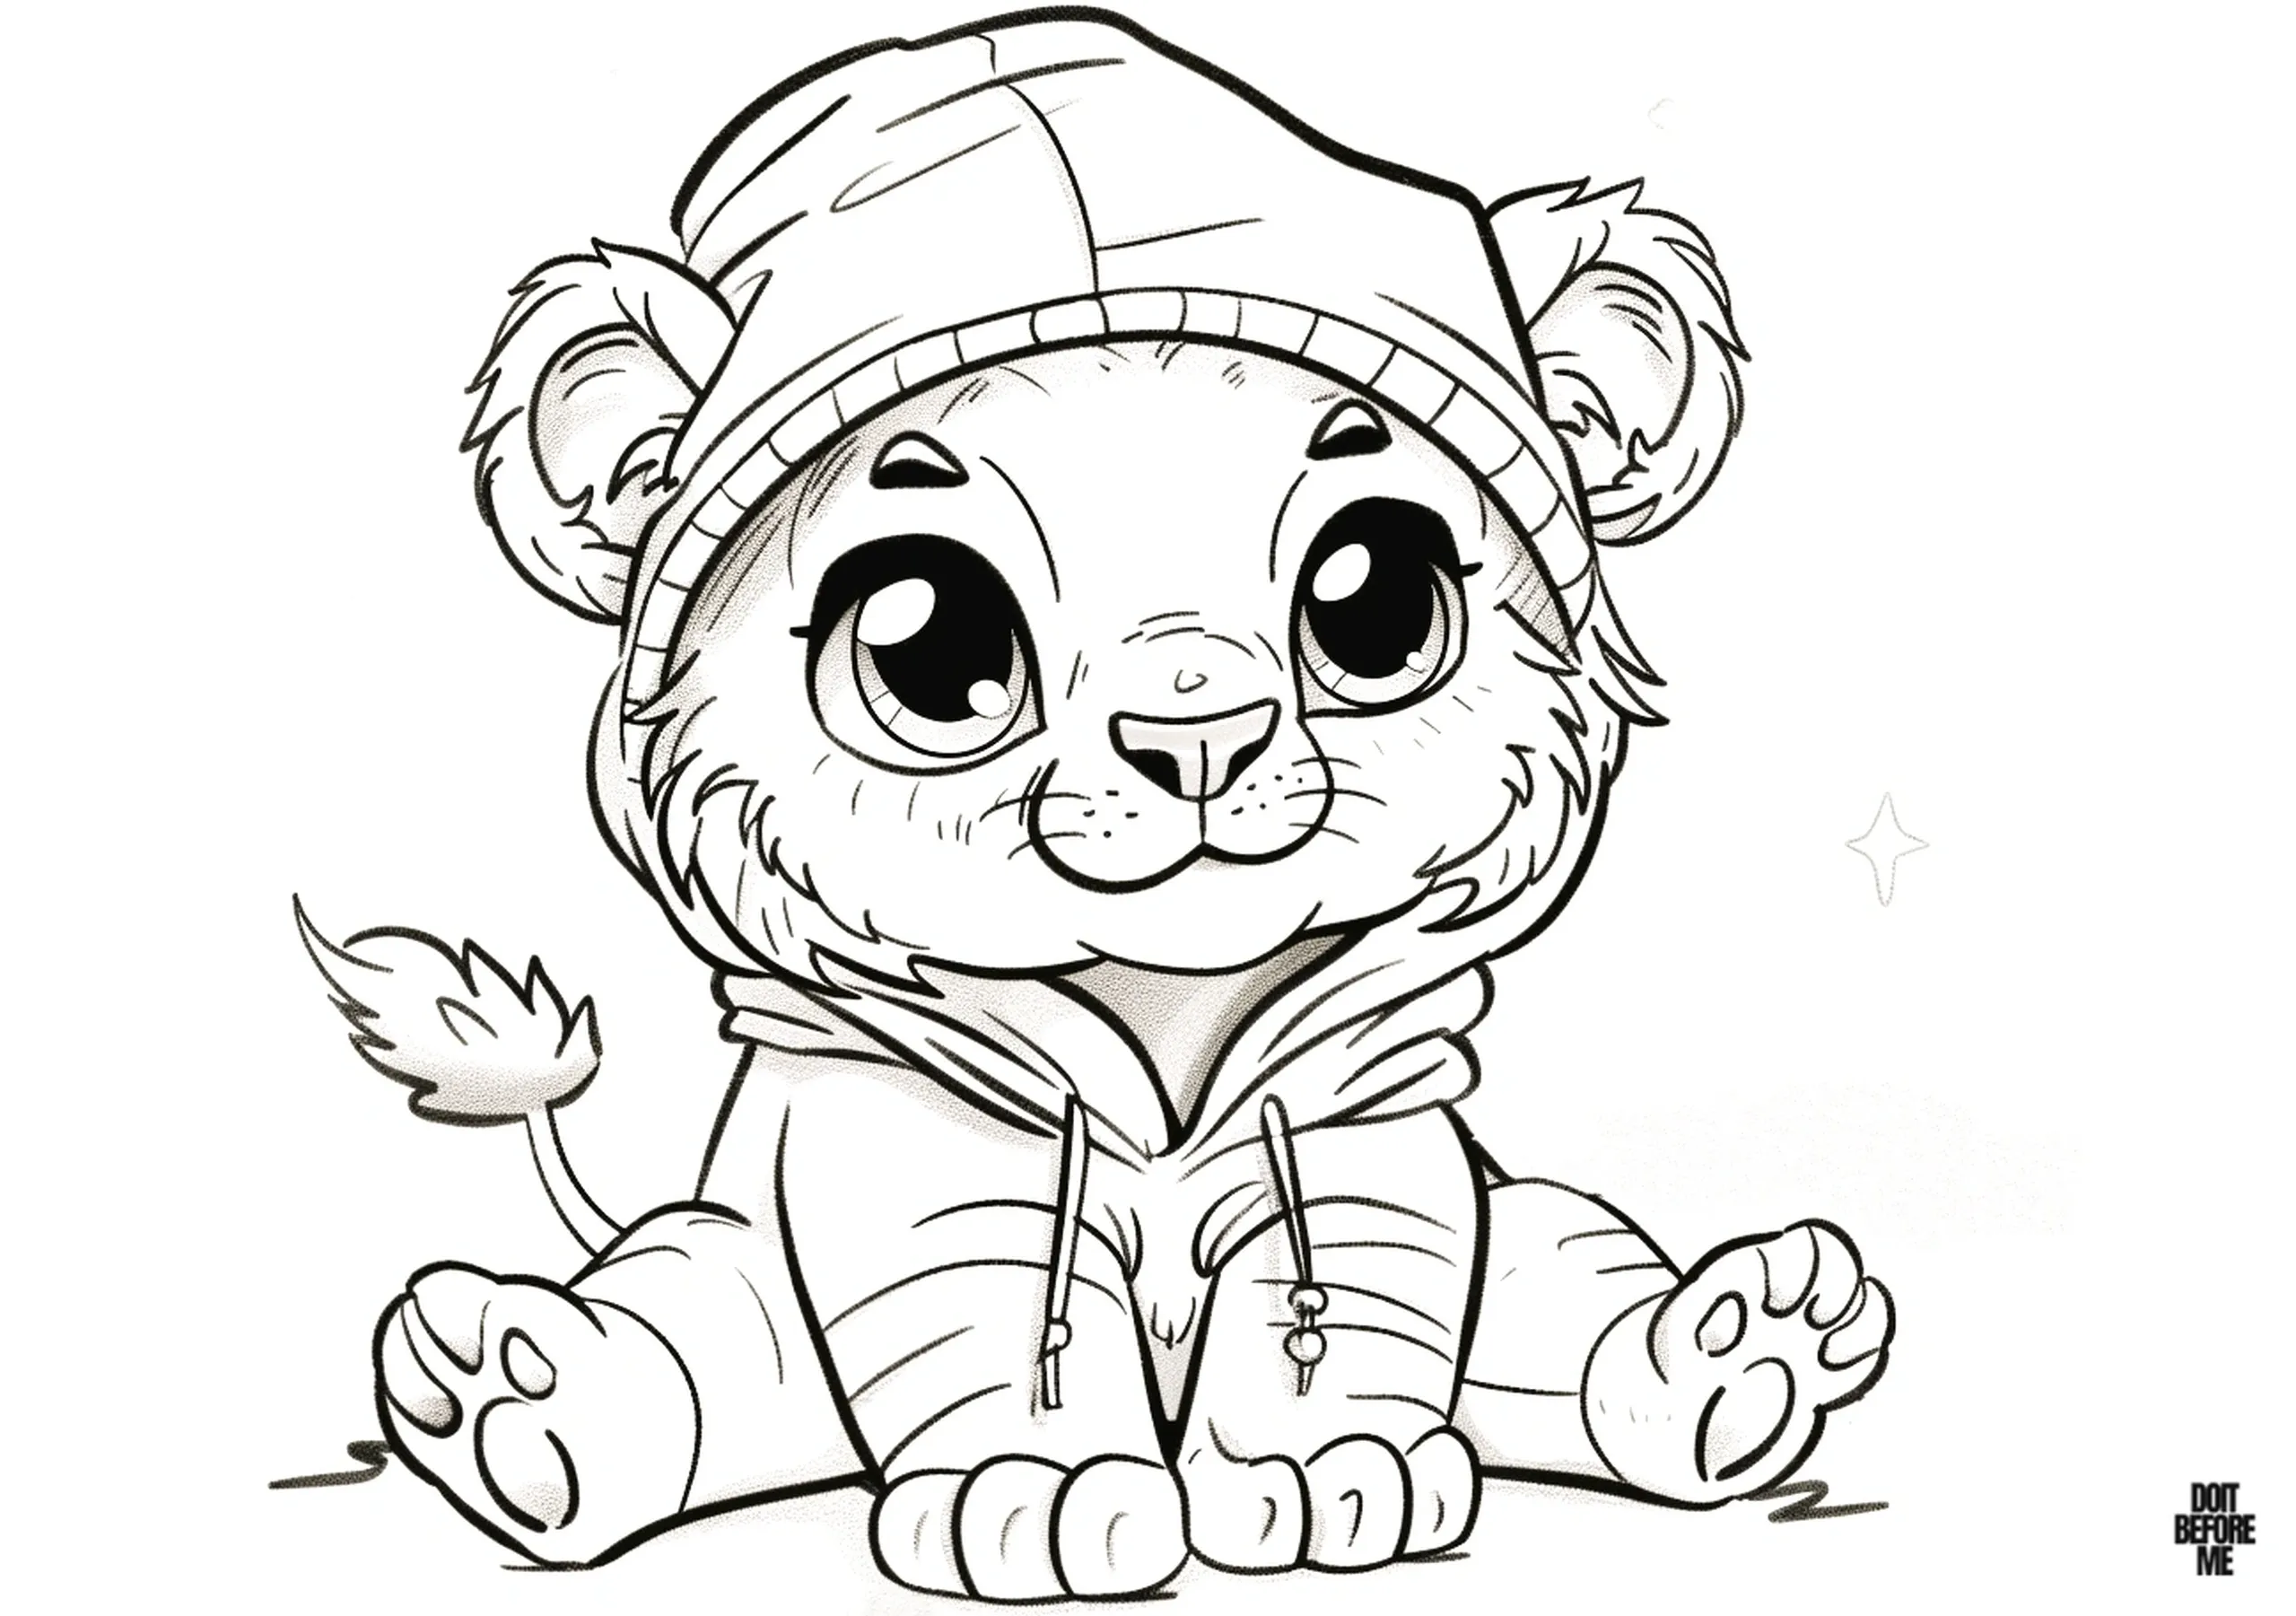 Printable coloring page featuring a cute baby lion sitting and wearing a hoodie is suitable for kids to color due to its easy design.